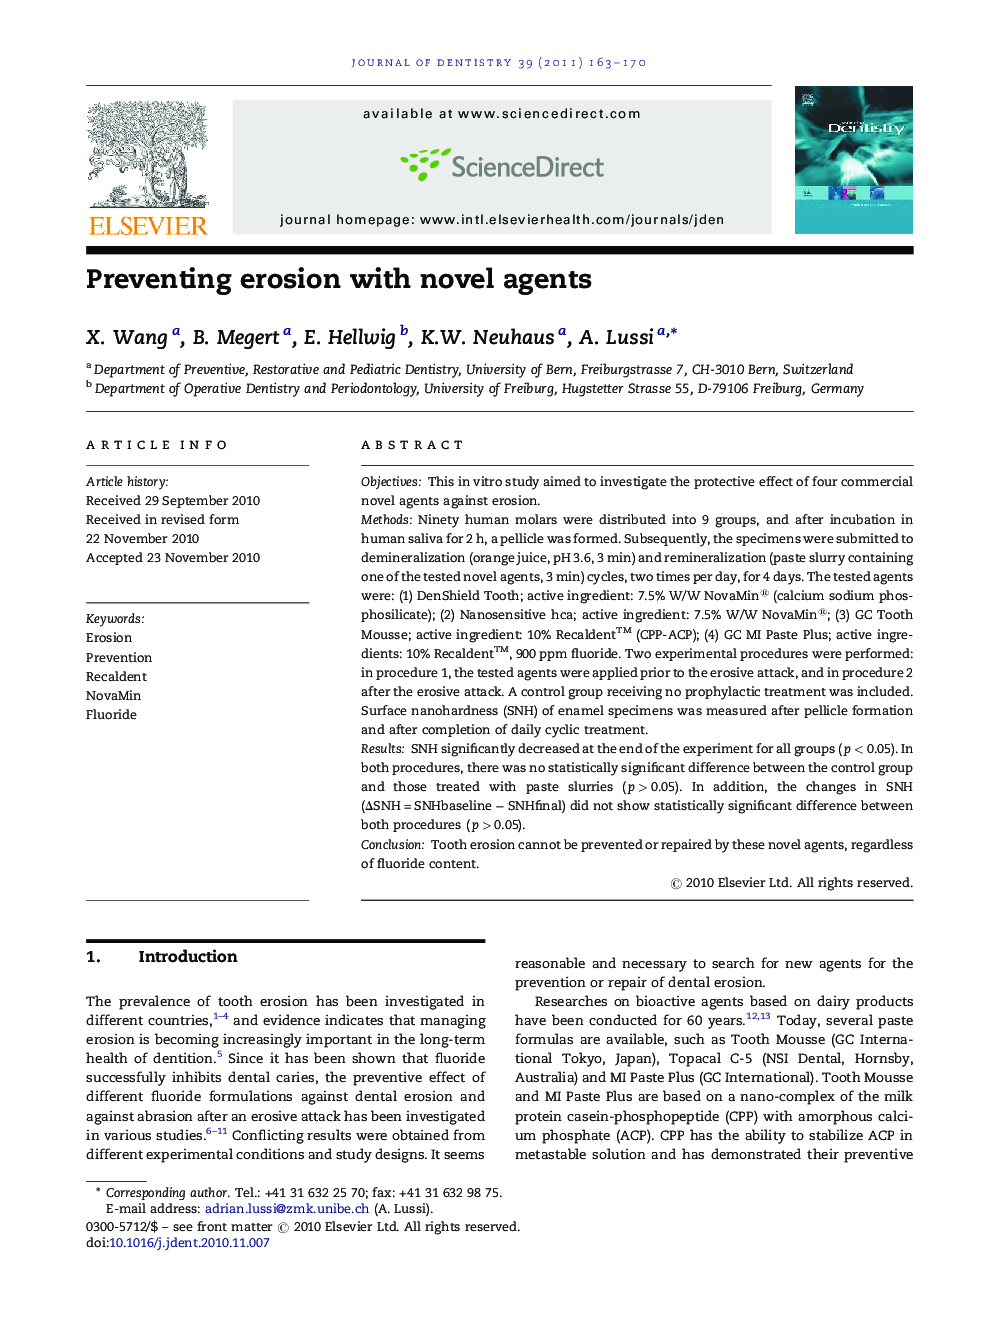 Preventing erosion with novel agents